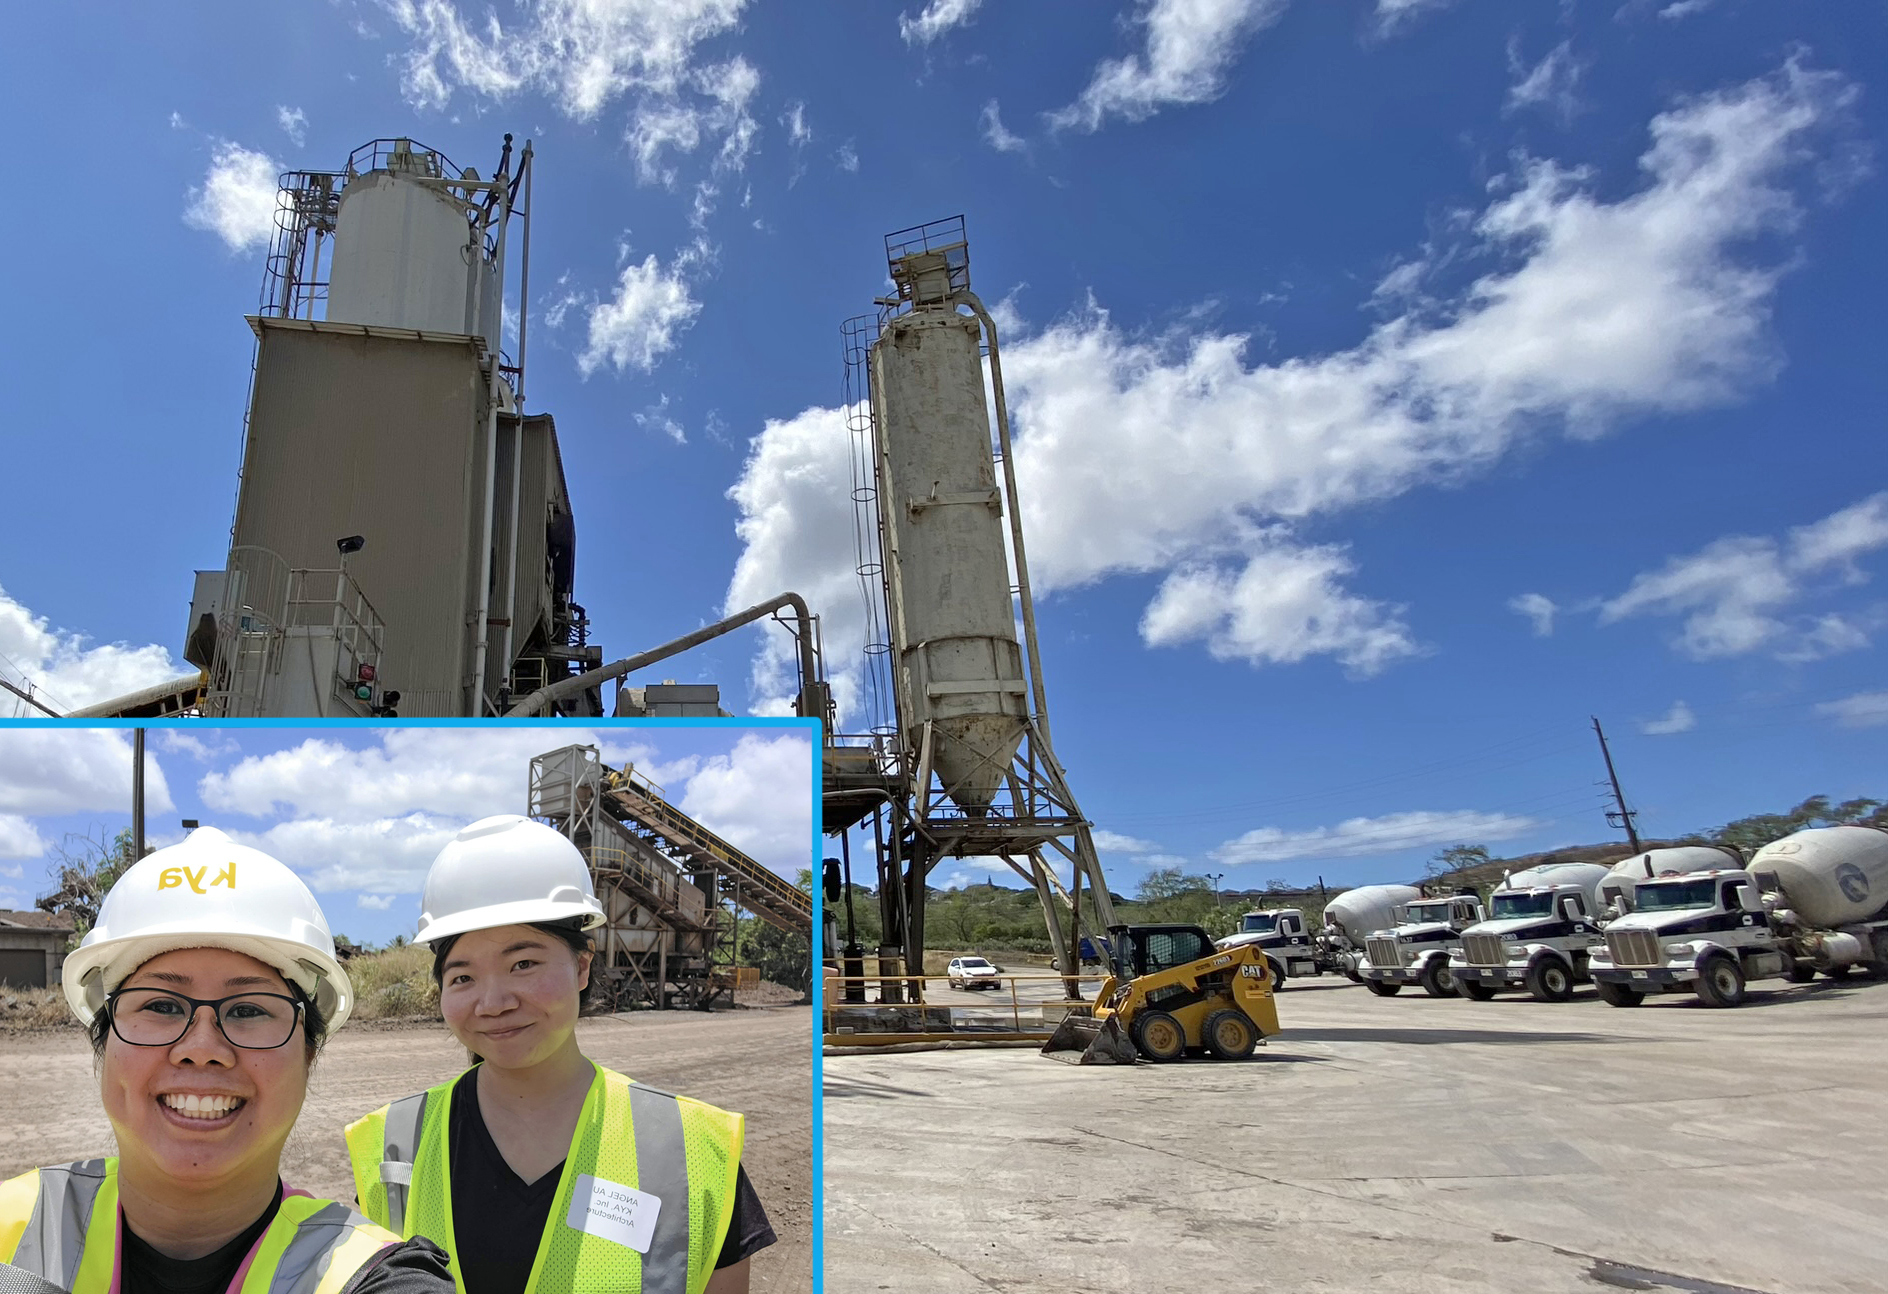 KYAers attend Hawaiian Cement Plant Tour in Halawa provided by Masonry Institute of Hawaii and Hawaiian Cement.